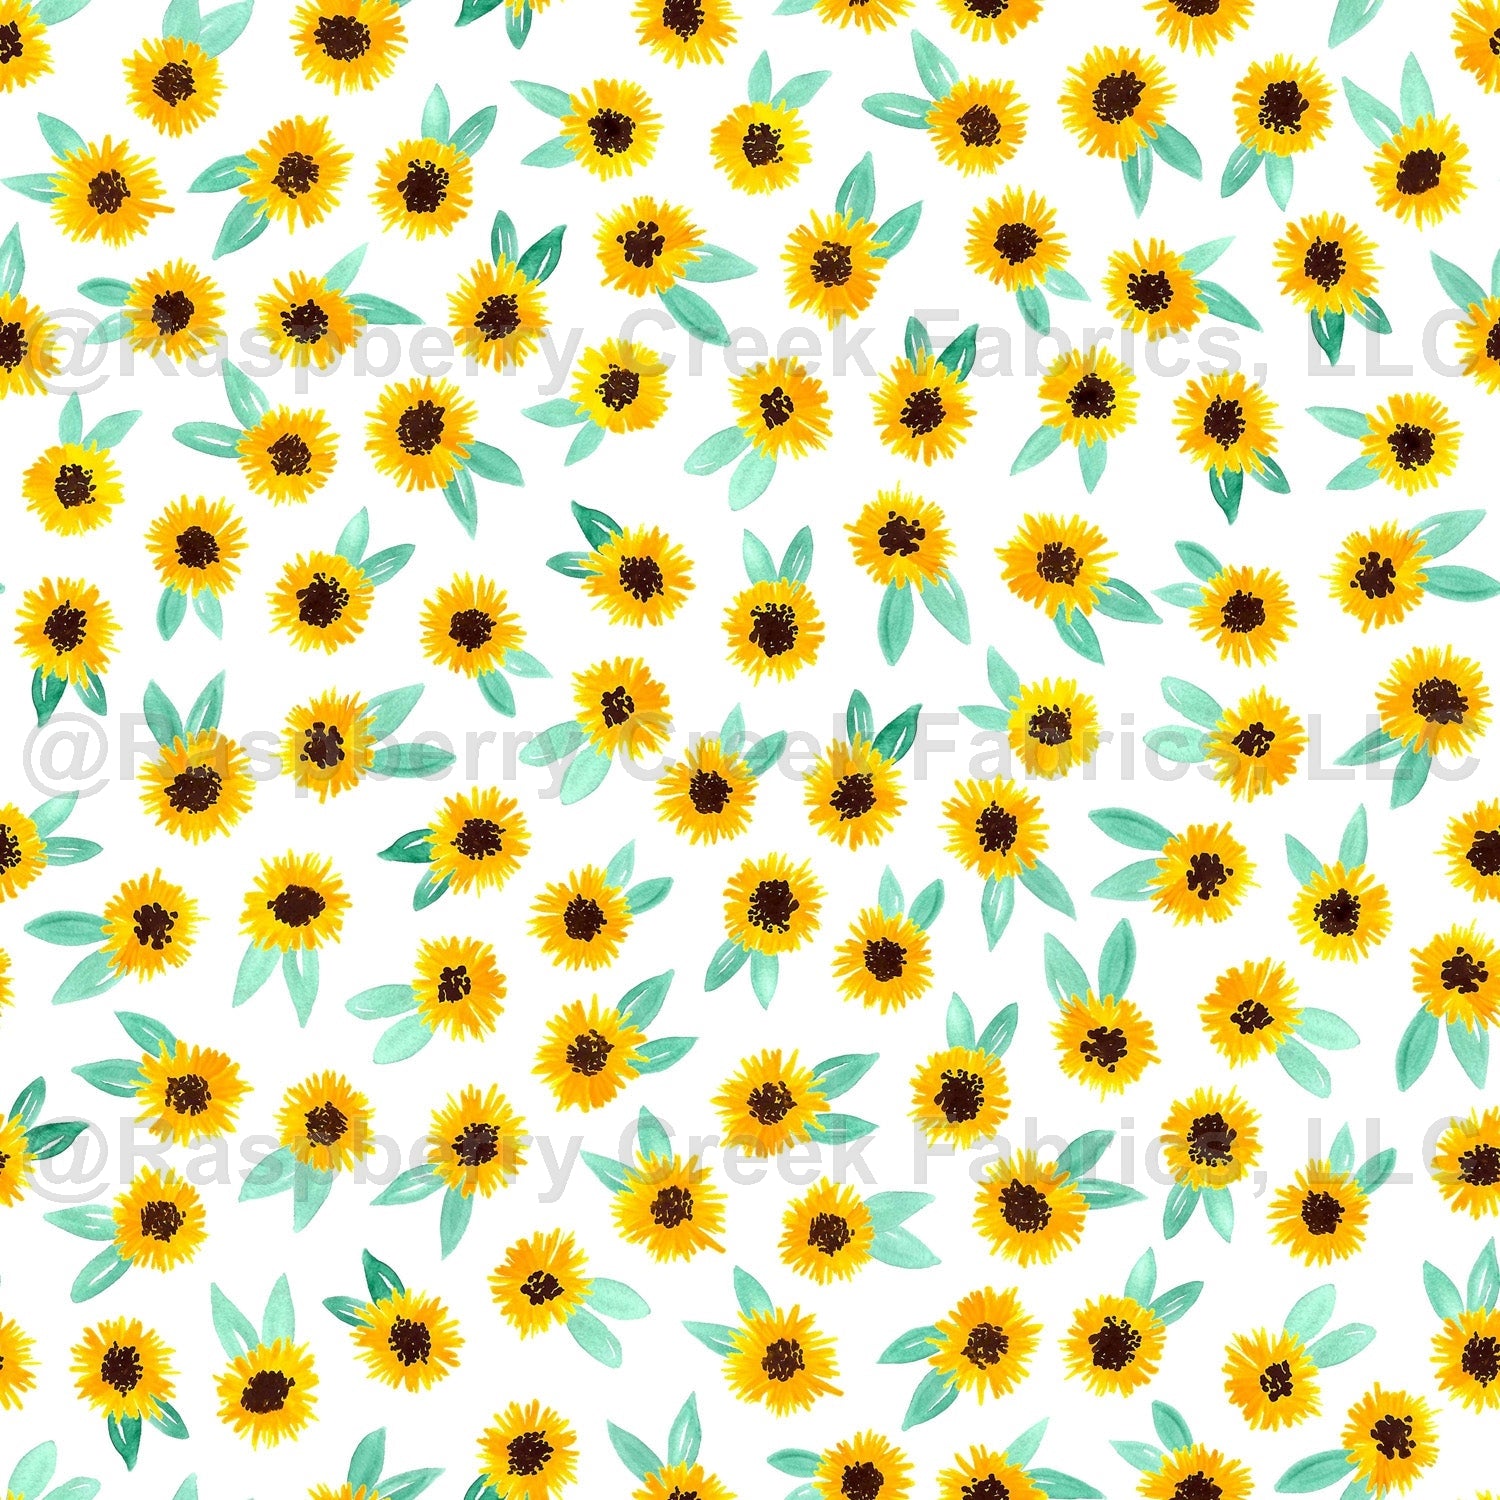 Mustard Yellow Navy and Khaki Sunflower Stripe Print Fabric, Fall Florals  by Brittney Laidlaw for CLUB Fabrics